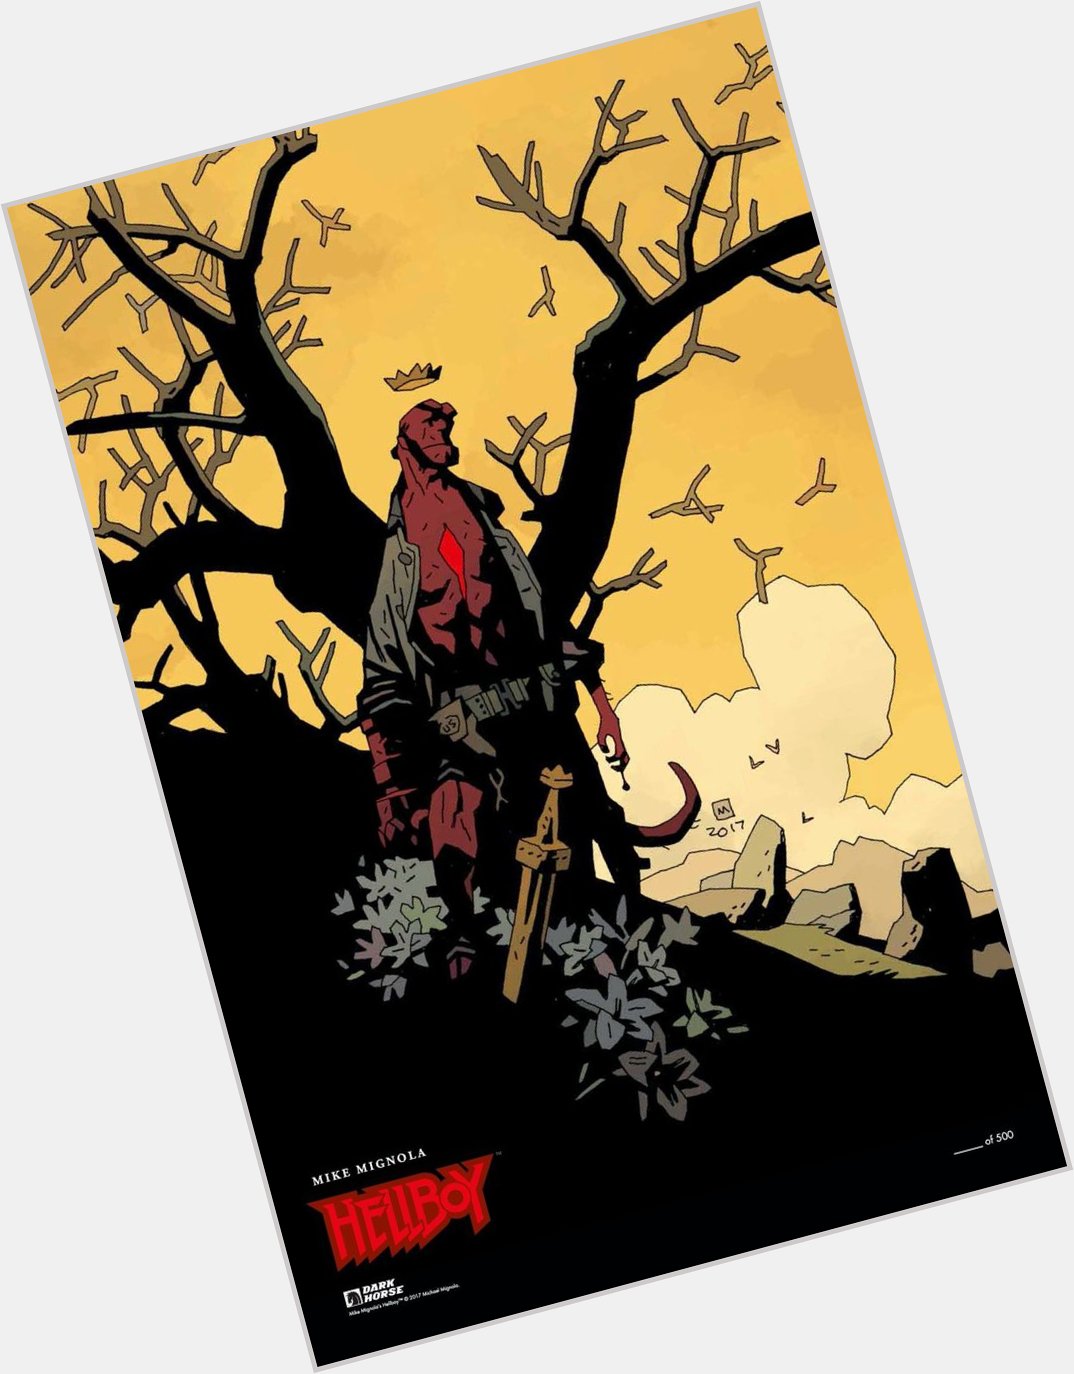 Happy birthday, Mike Mignola! 

Folks, what are some of your favorite Mignola stories, artwork? 